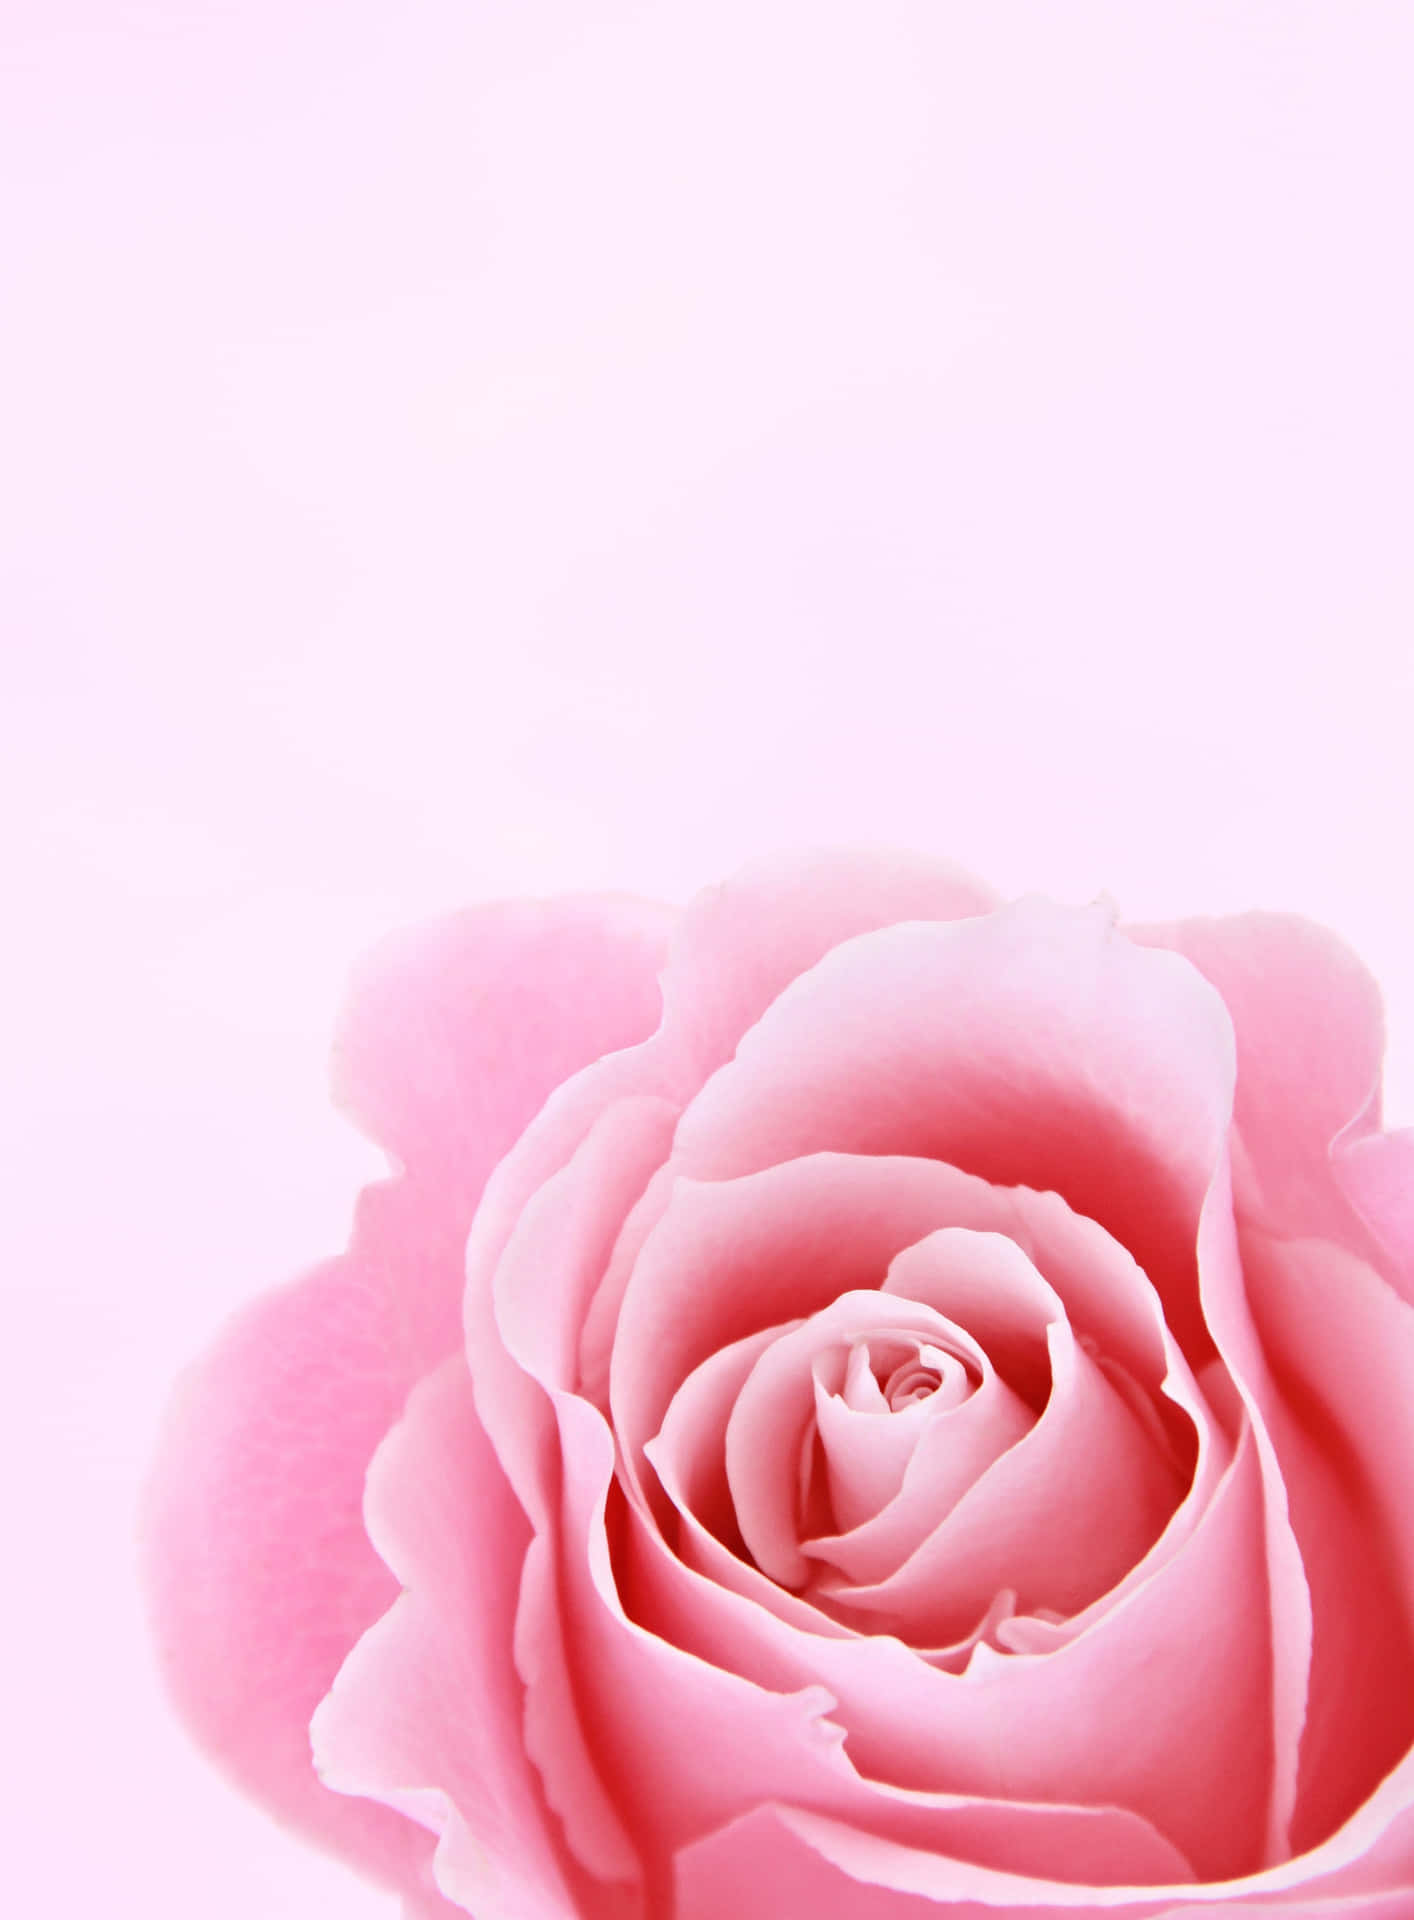 Blooming Beauty - A Stunning Cute Flower Background